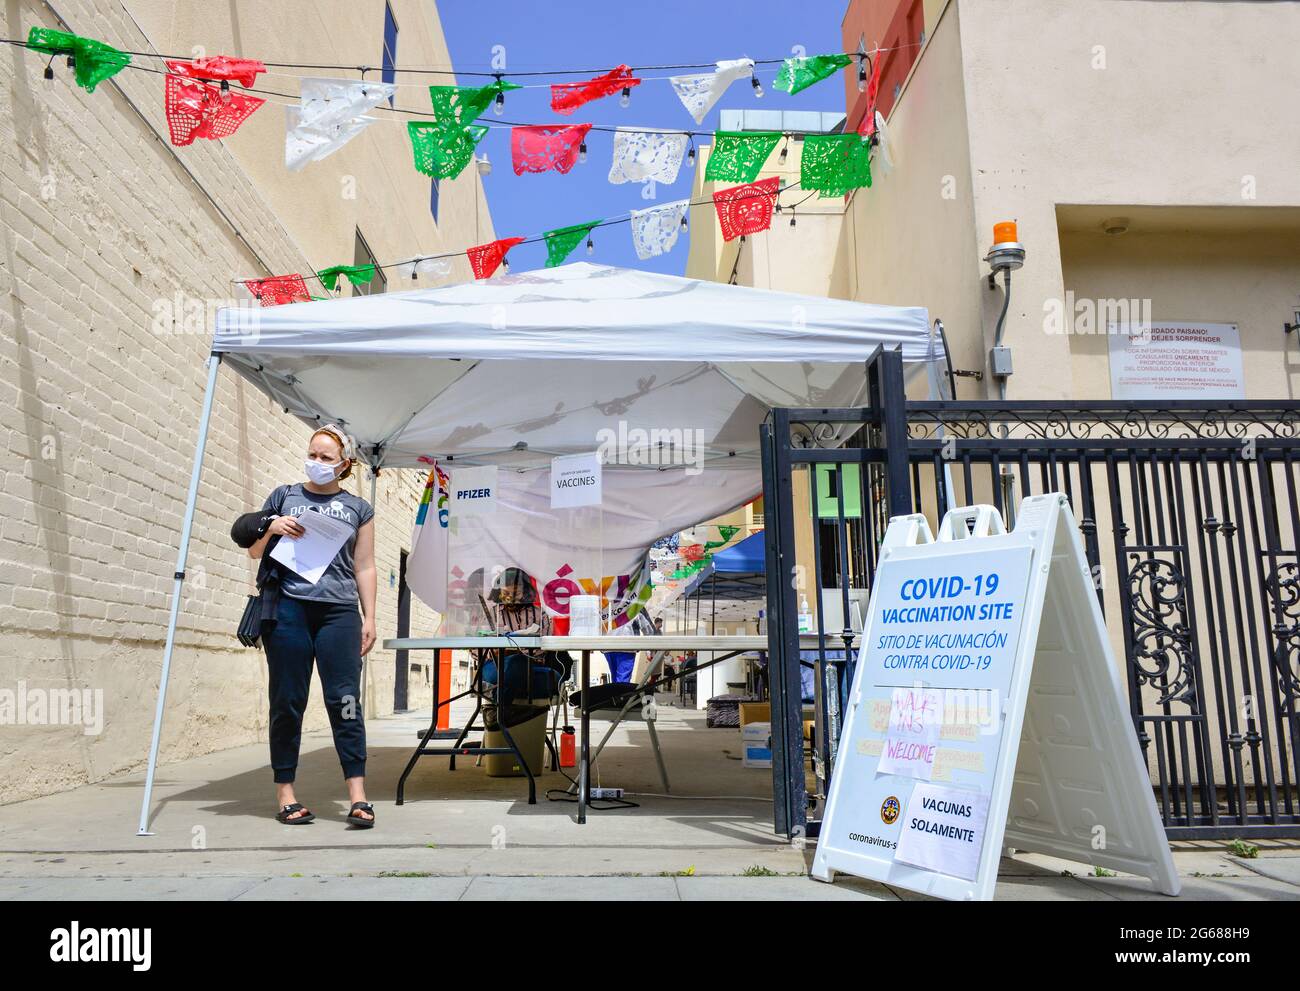 Covid-19 Vaccination site on the sidewalk set up with tent and workers offering Pfizer vaccines with paper flags decoration in Little Italy, San Diego Stock Photo